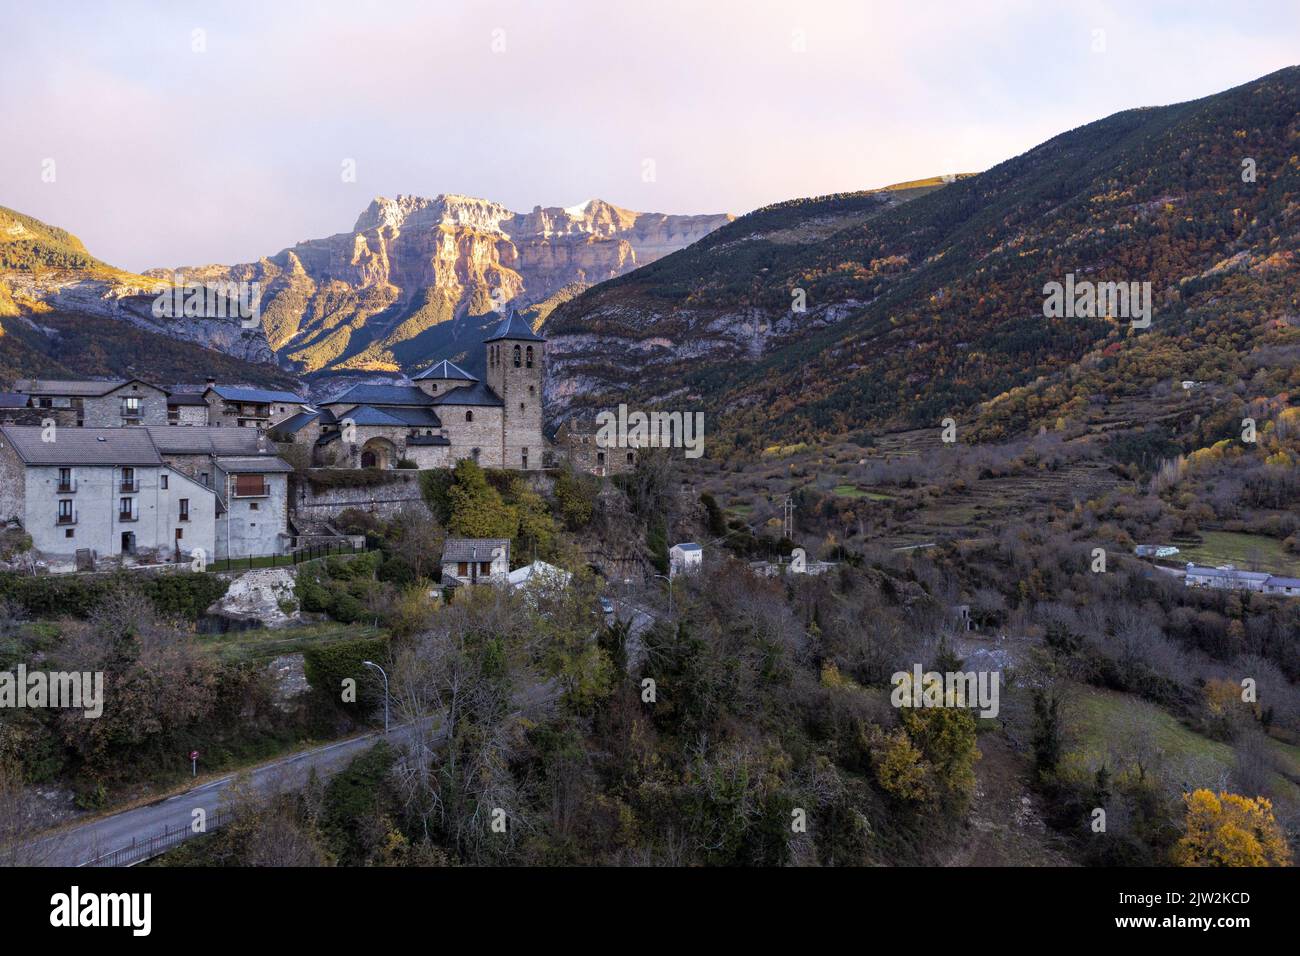 Picturesque drone view of ancient stone castle and residential houses surrounded by massive rocky mountains in Torla Ordesa town in Huesca Stock Photo